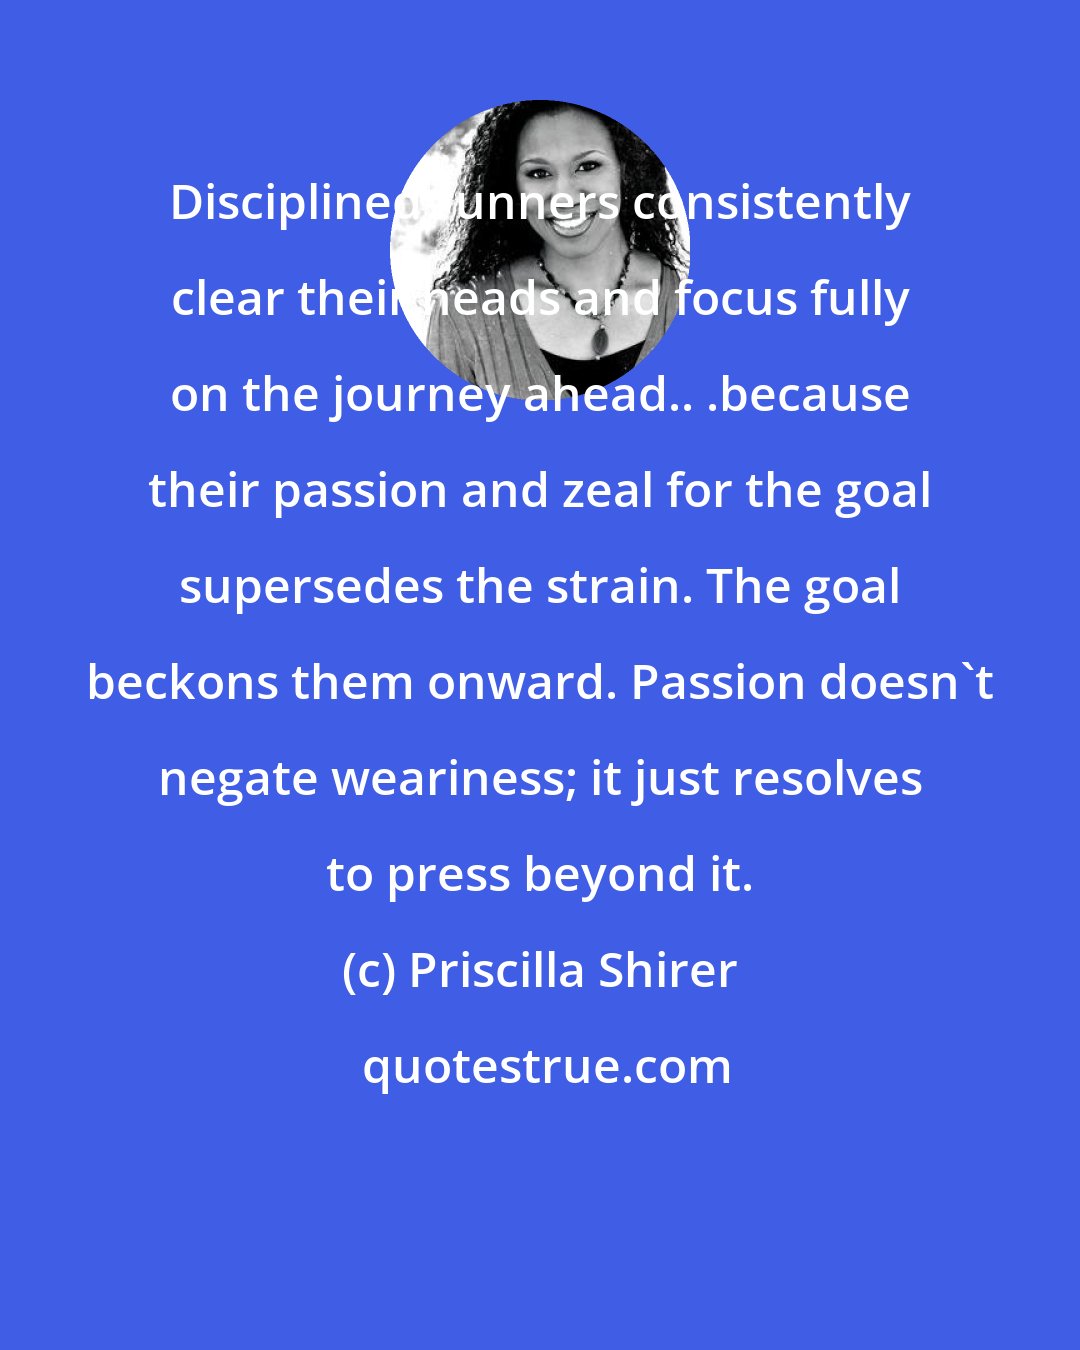 Priscilla Shirer: Disciplined runners consistently clear their heads and focus fully on the journey ahead.. .because their passion and zeal for the goal supersedes the strain. The goal beckons them onward. Passion doesn't negate weariness; it just resolves to press beyond it.